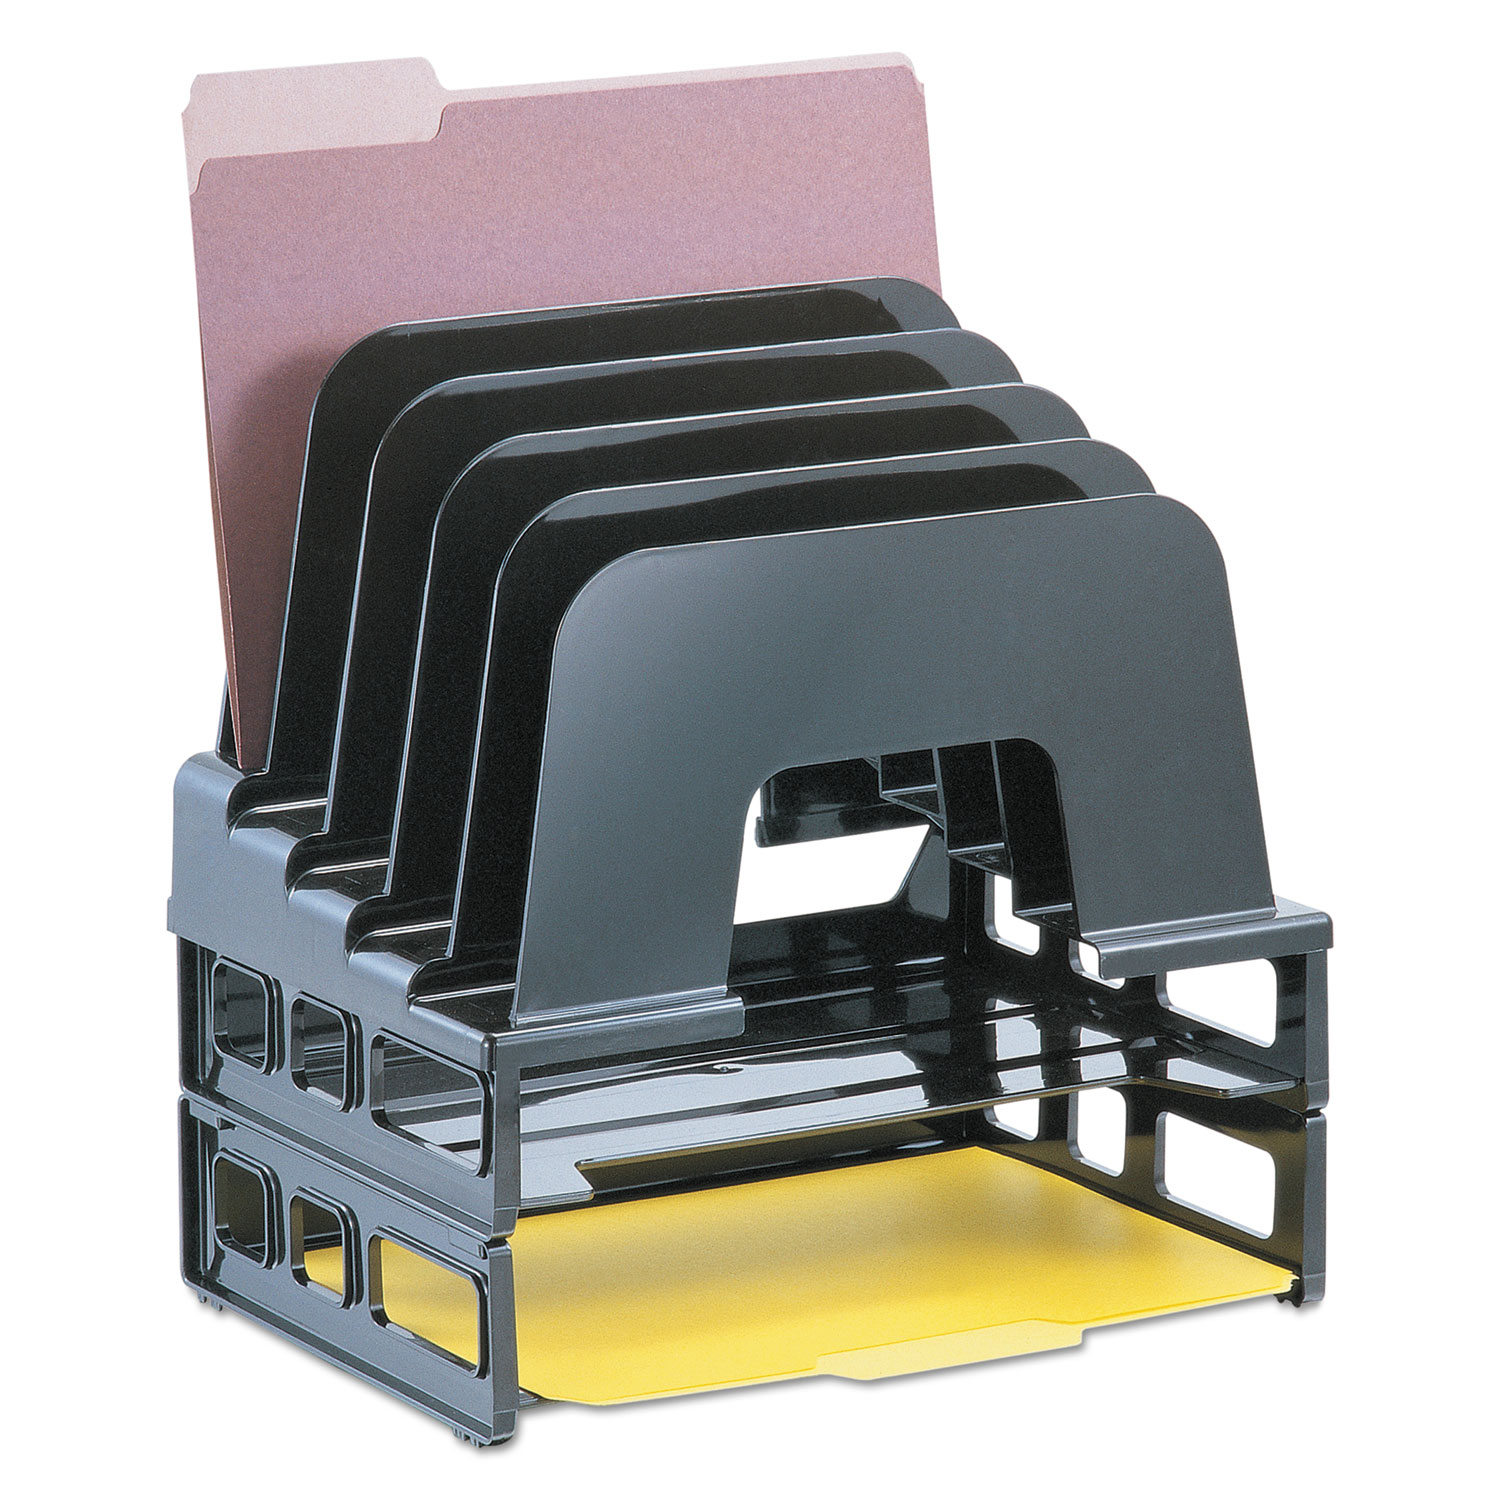  Officemate 22112 Incline Sorter, 5 Sections, Letter Size Files, 9.13 x 13.5 x 14, Black (OIC22112) 